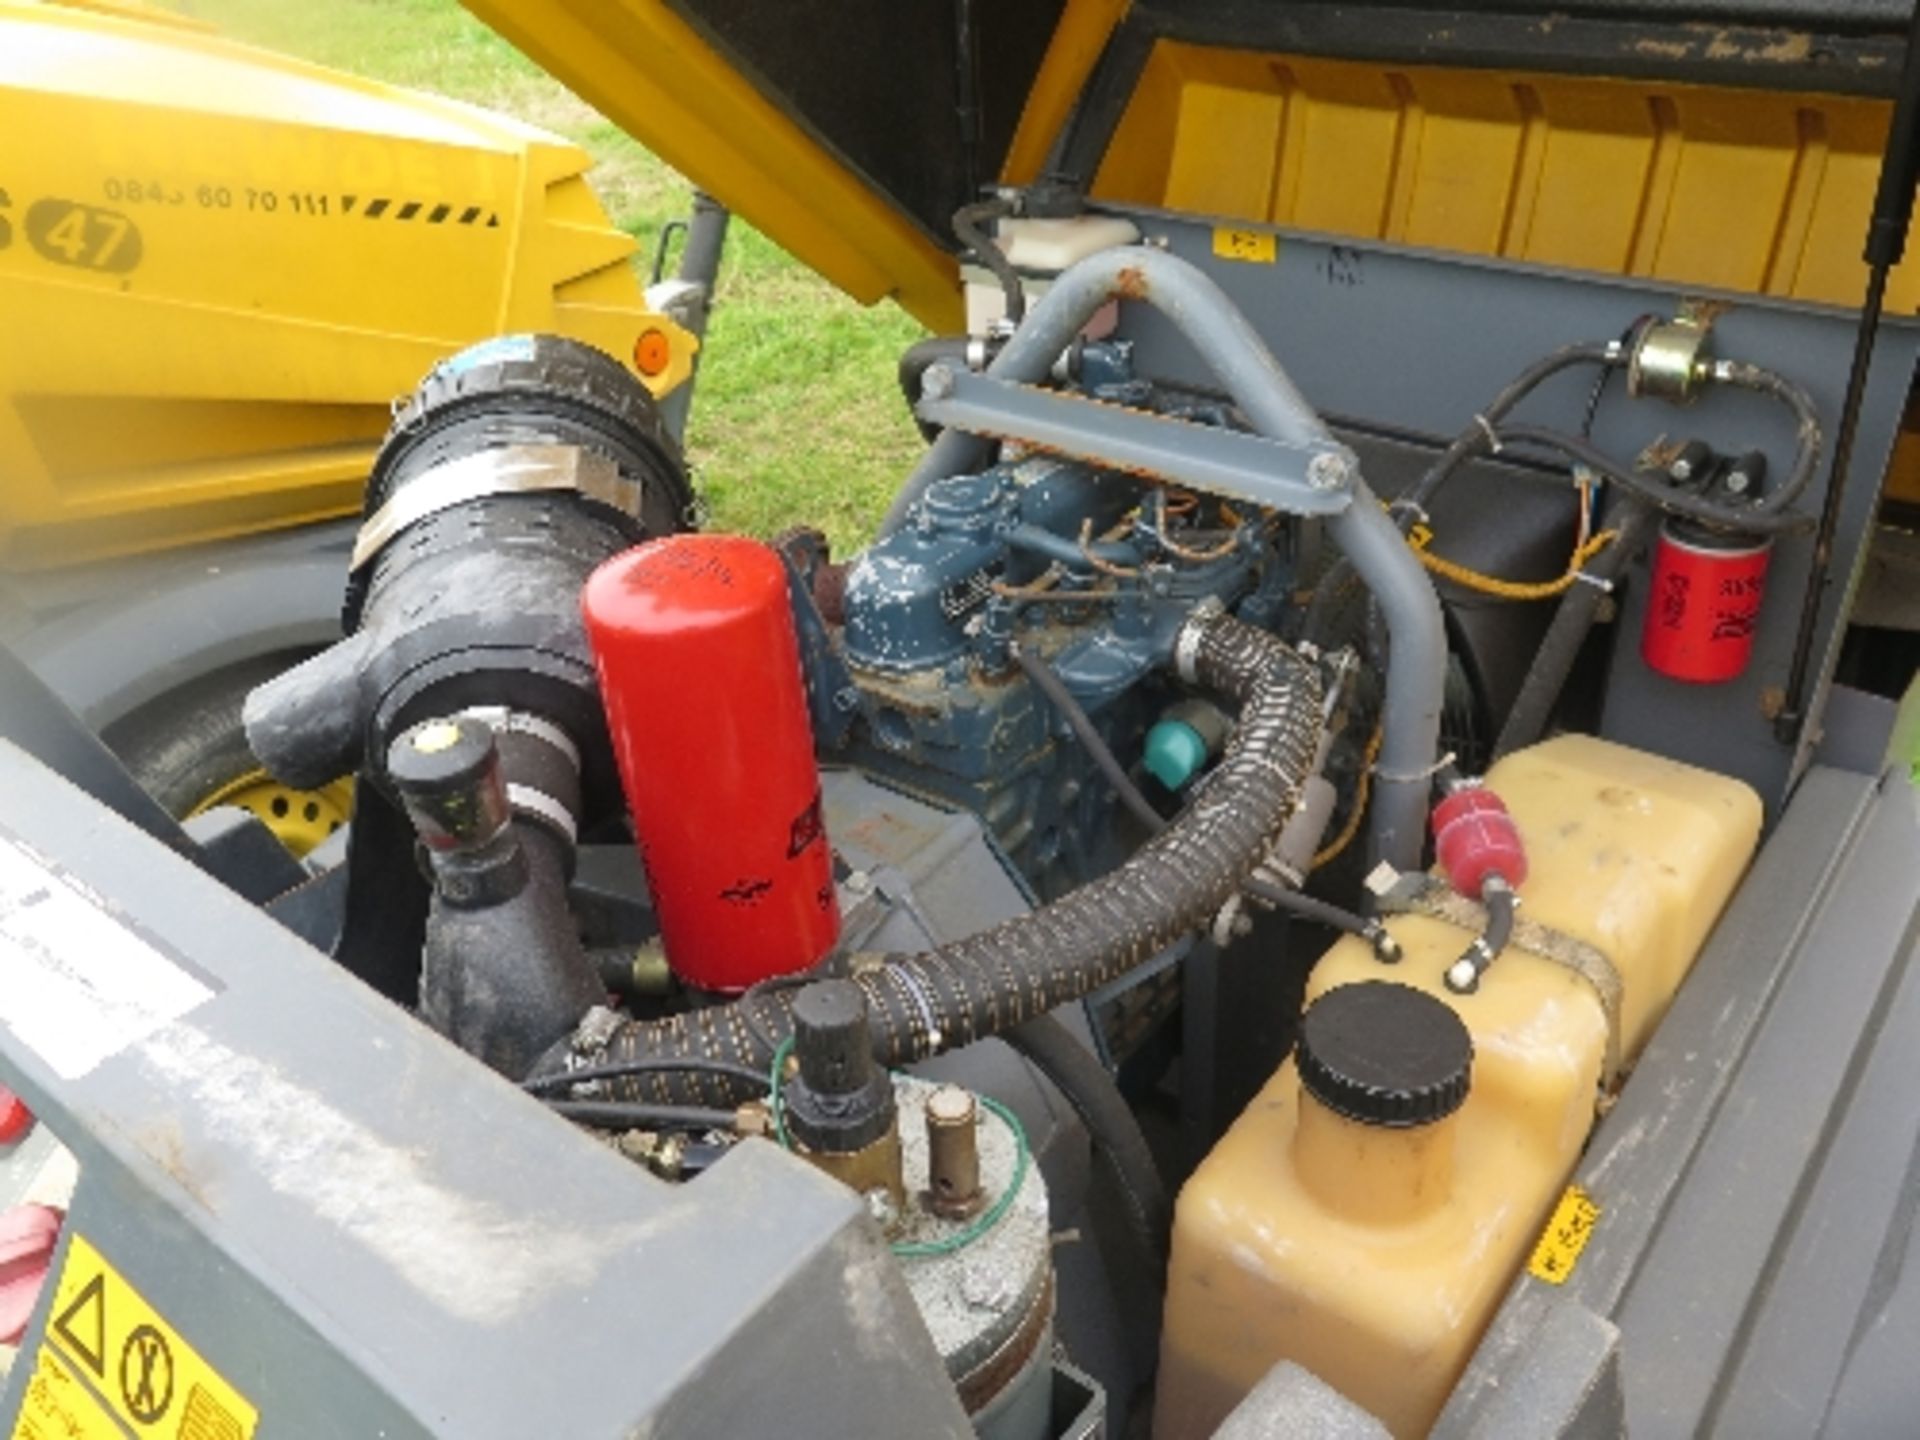 Atlas Copco XAS47 compressor 2008 5002443
618 HOURS - KUBOTA POWER - RUNS AND MAKES AIR
ALL LOTS - Image 5 of 5